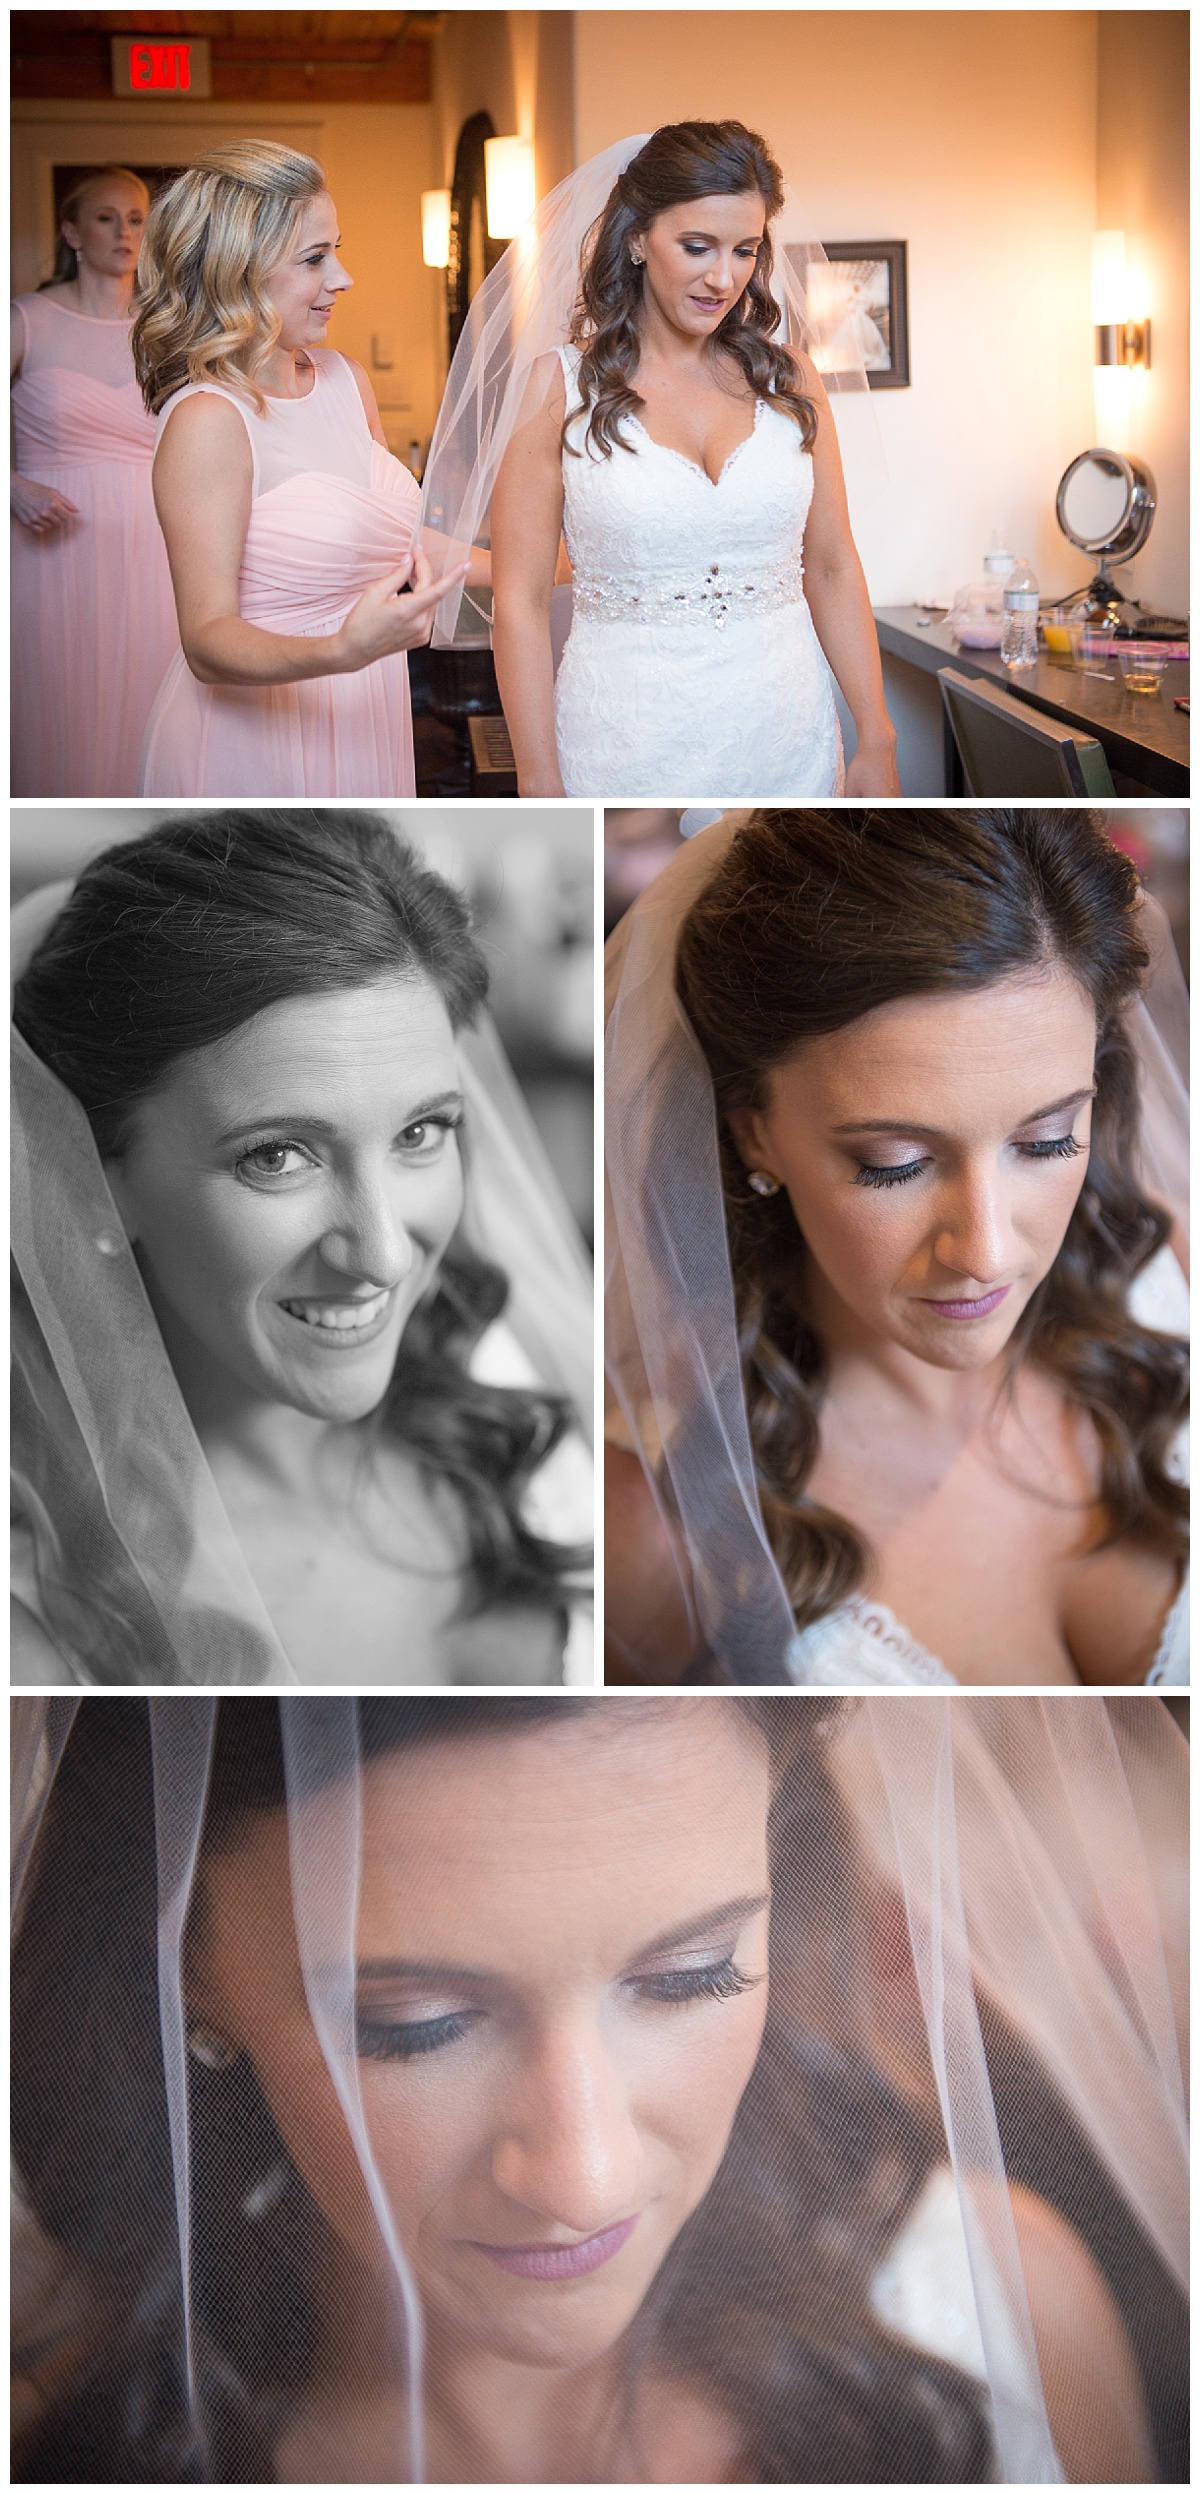 Bride final touches with veil